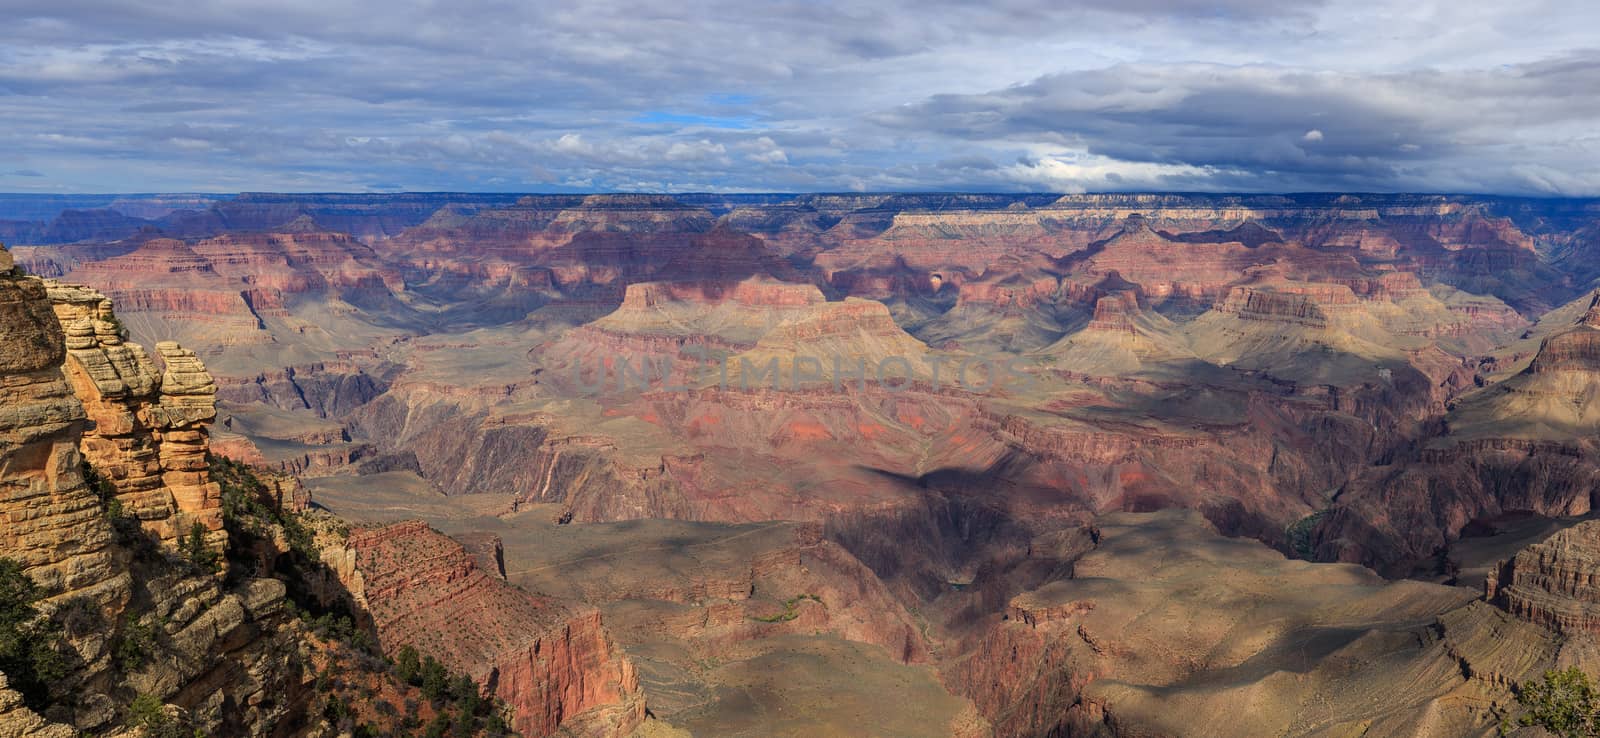 Awesome Landscape from South Rim of Grand Canyon, Arizona, Unite by dpetrakov